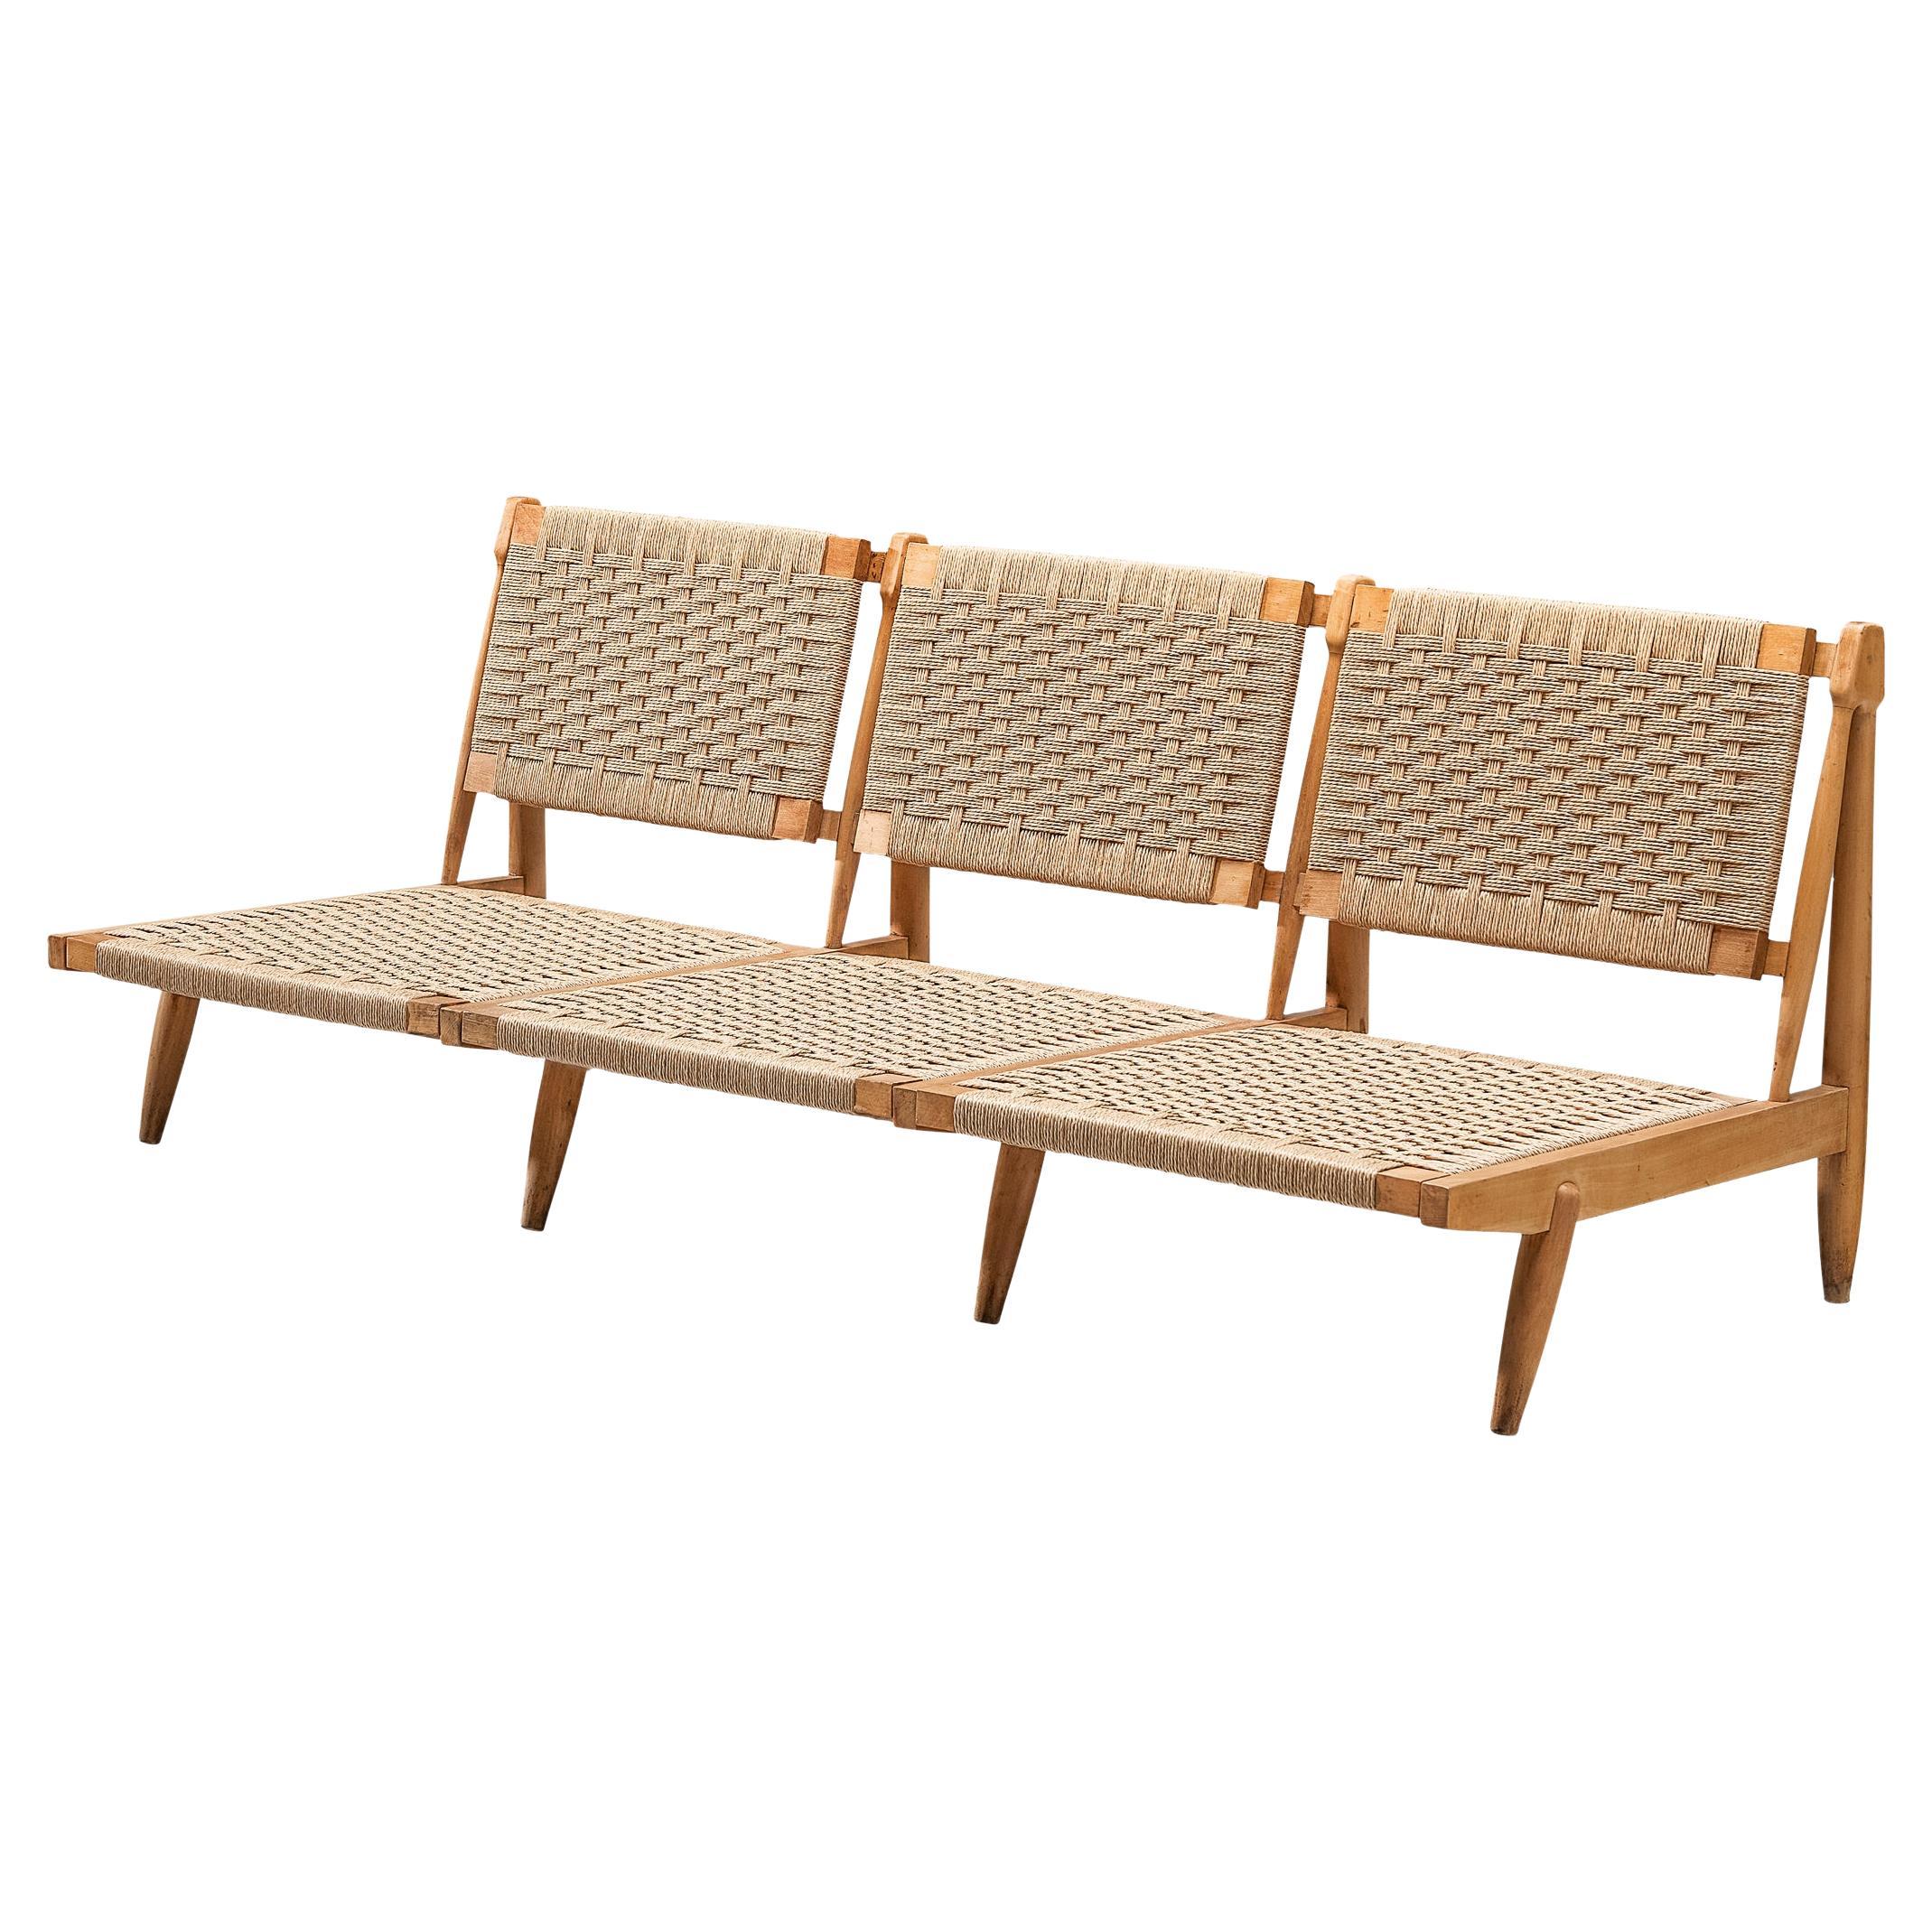 Spanish Bench in Wood and Straw